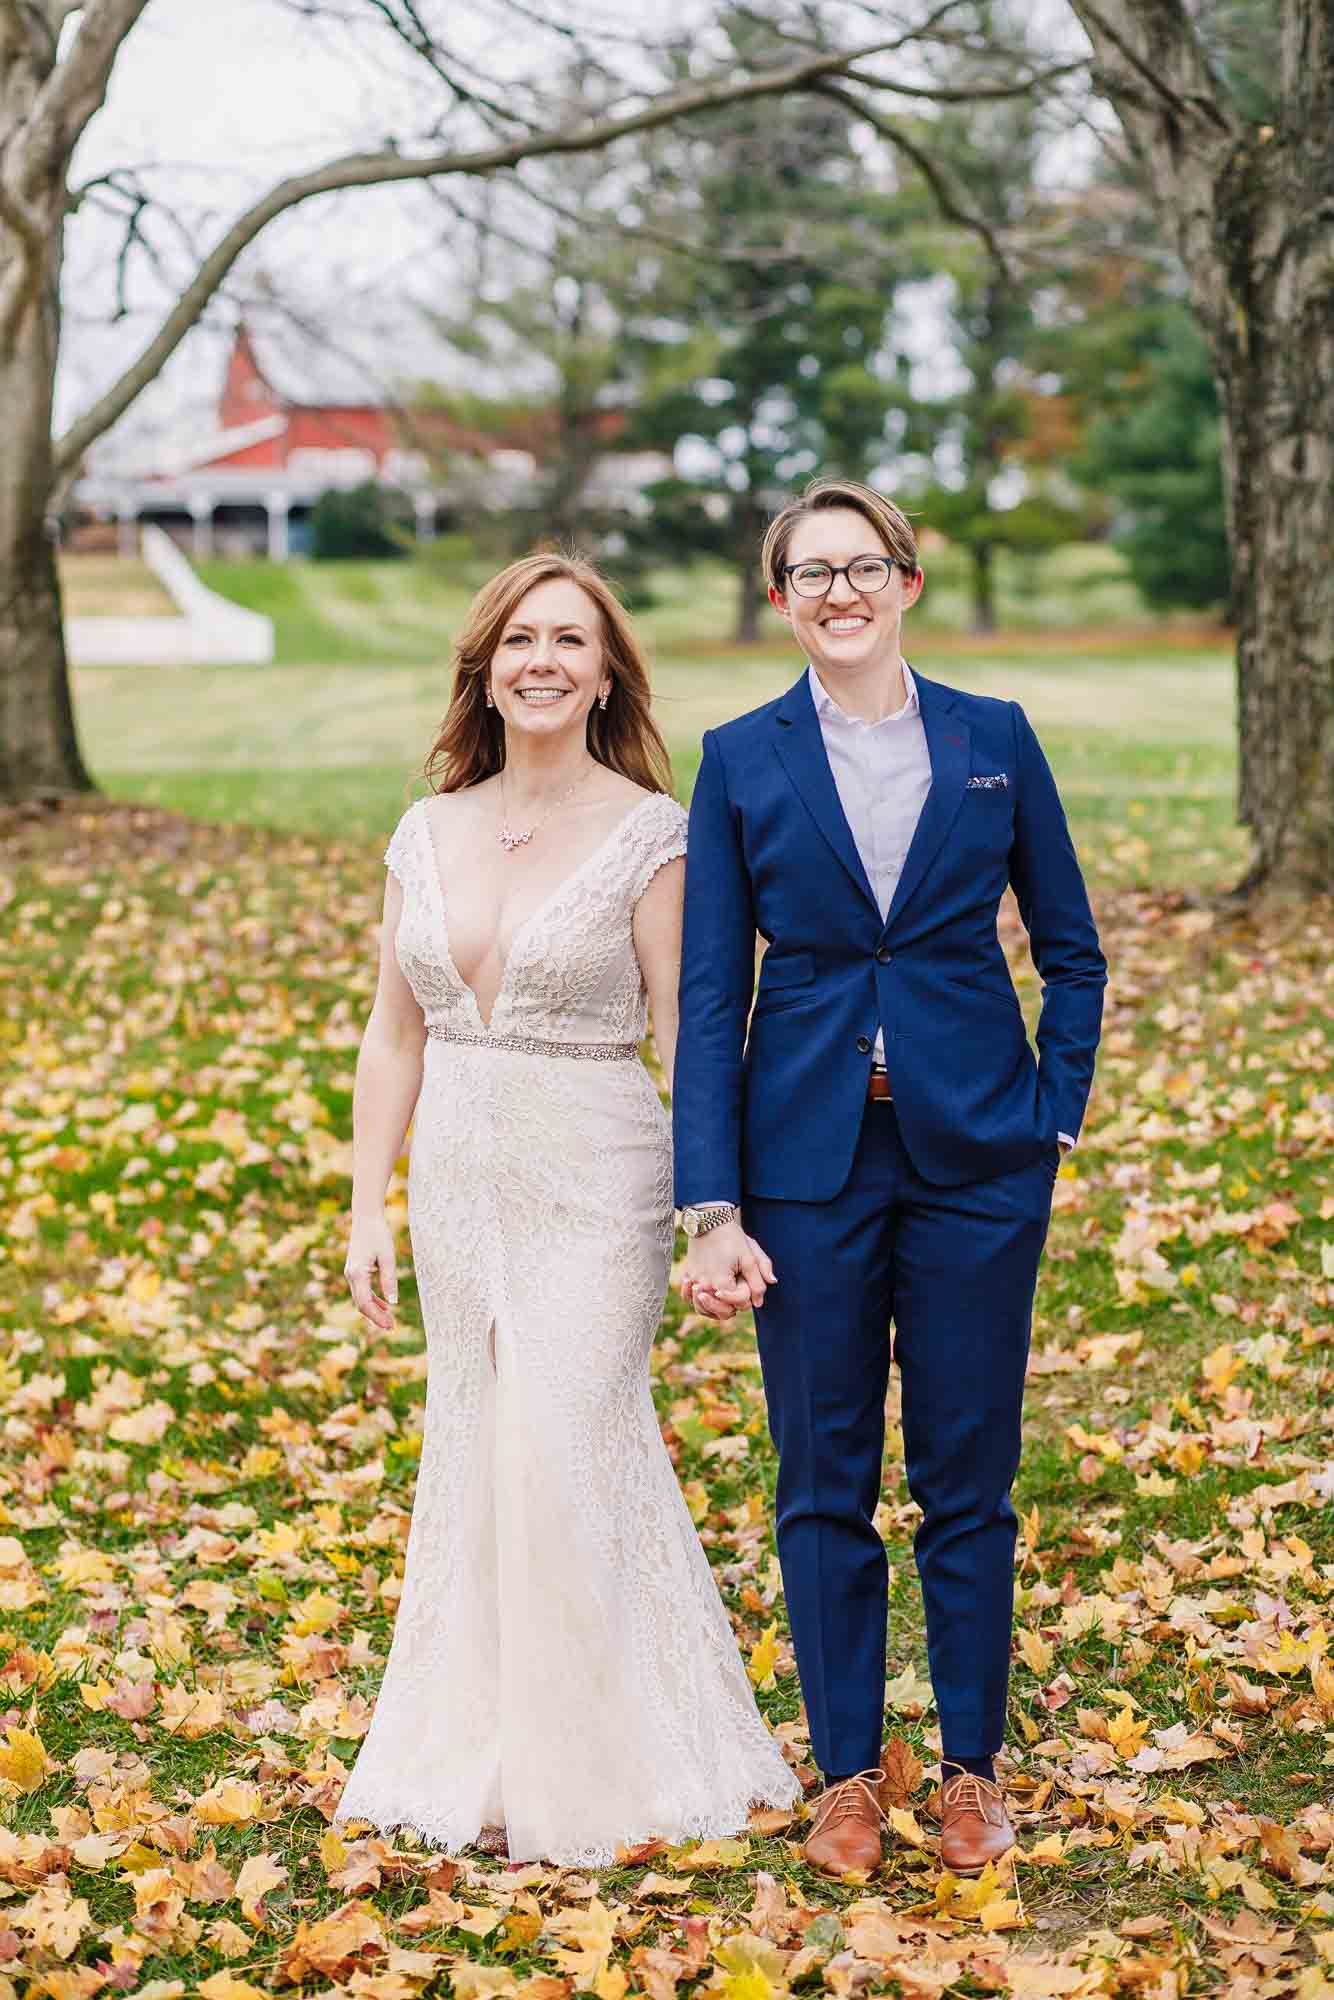 Intimate Maryland farm wedding with sparklers, confetti and an original song | Photography by Brea | Featured on Equally Wed, the leading LGBTQ+ wedding magazine